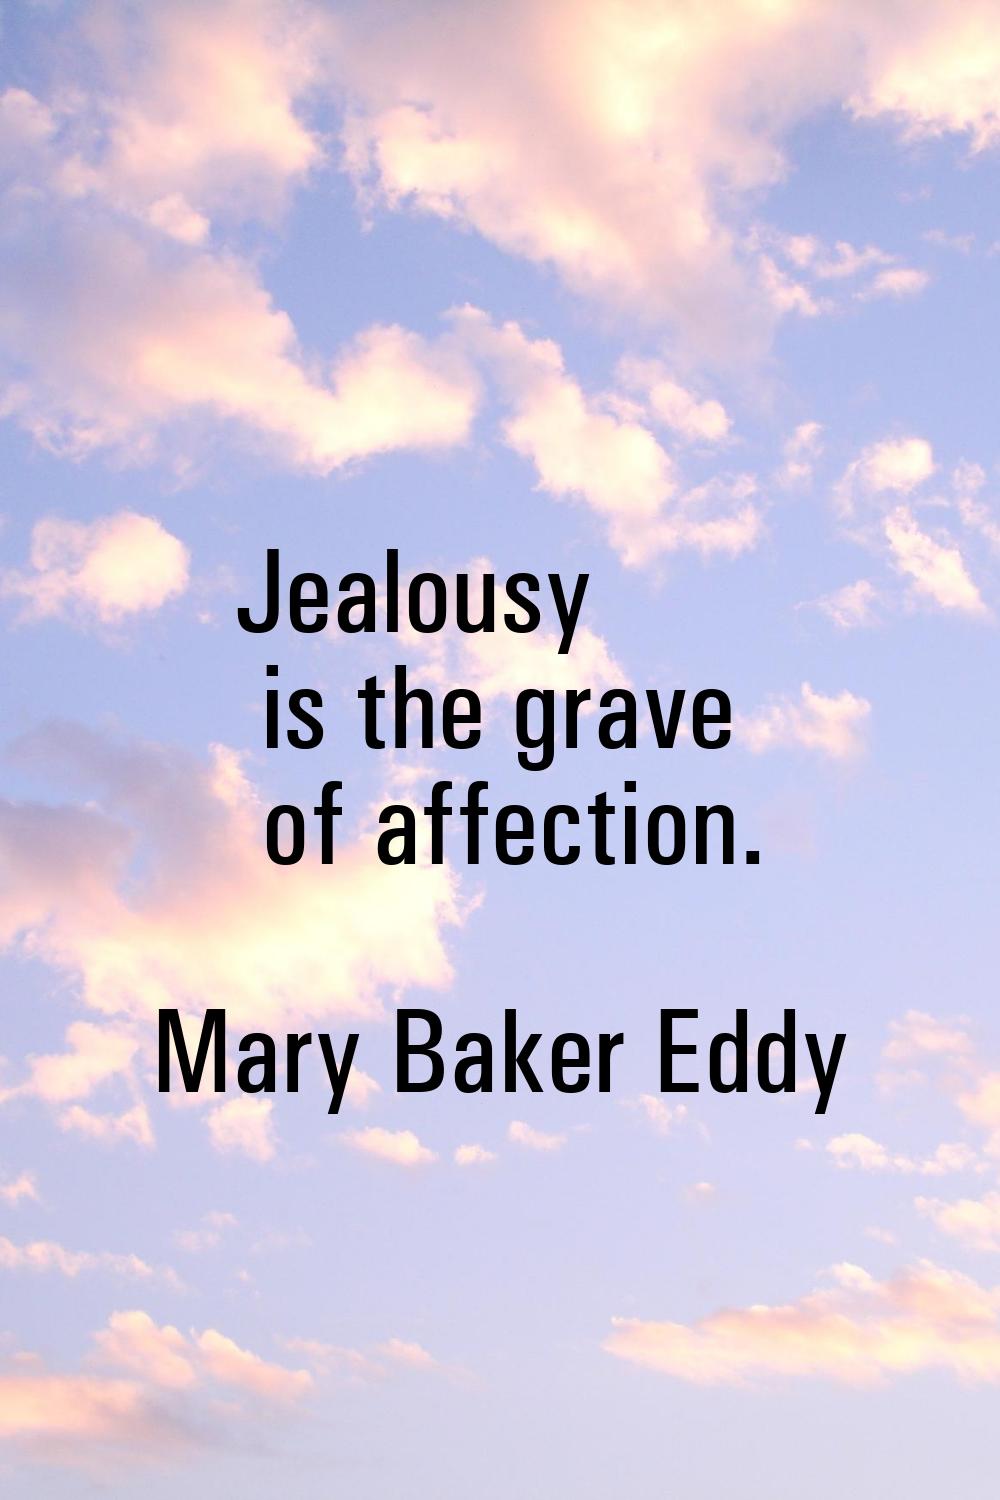 Jealousy is the grave of affection.